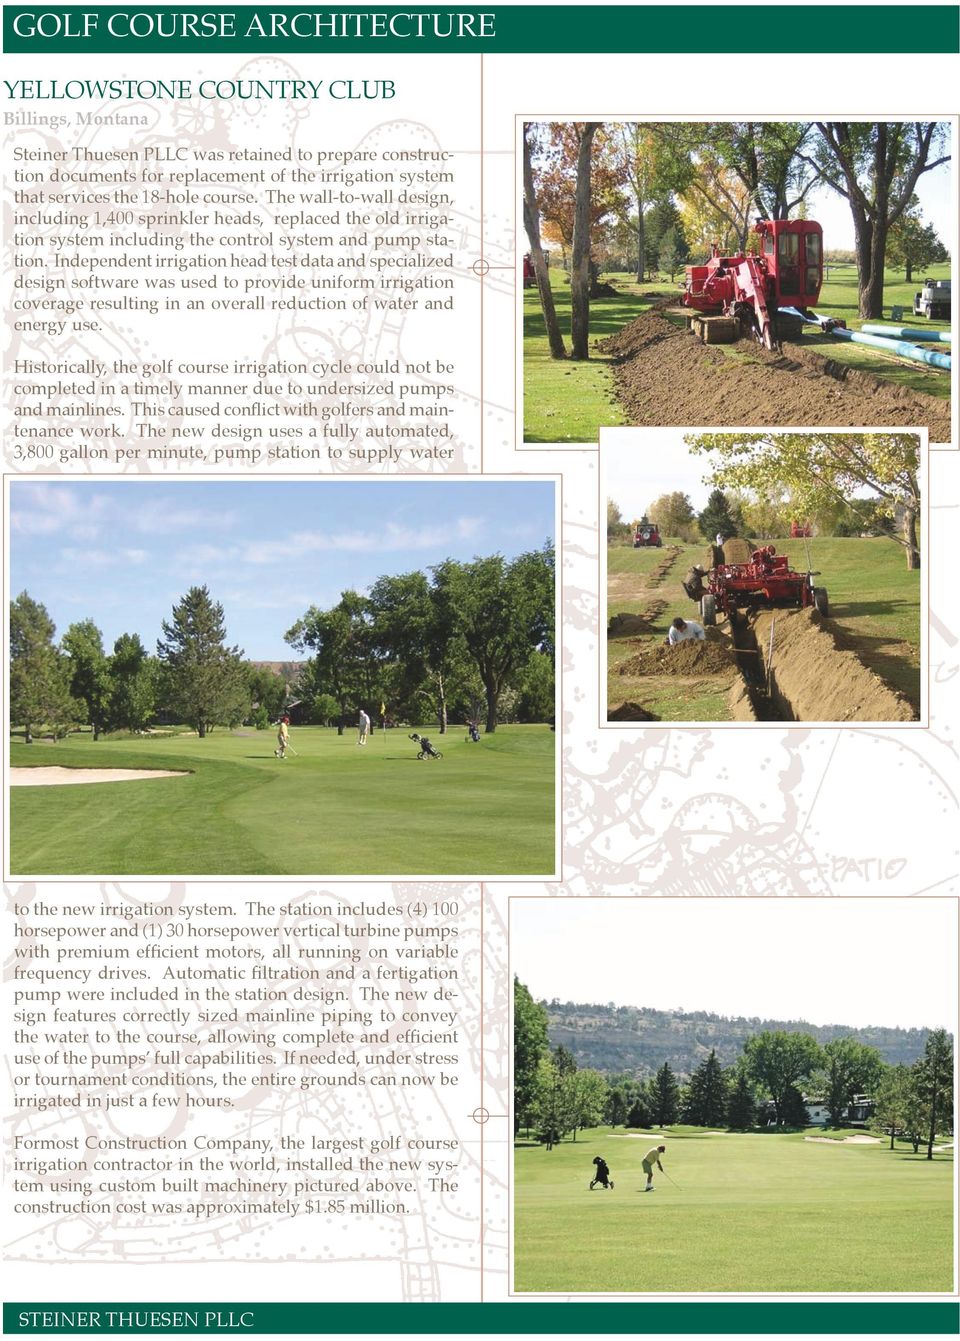 Independent irrigation head test data and specialized design software was used to provide uniform irrigation coverage resulting in an overall reduction of water and energy use.